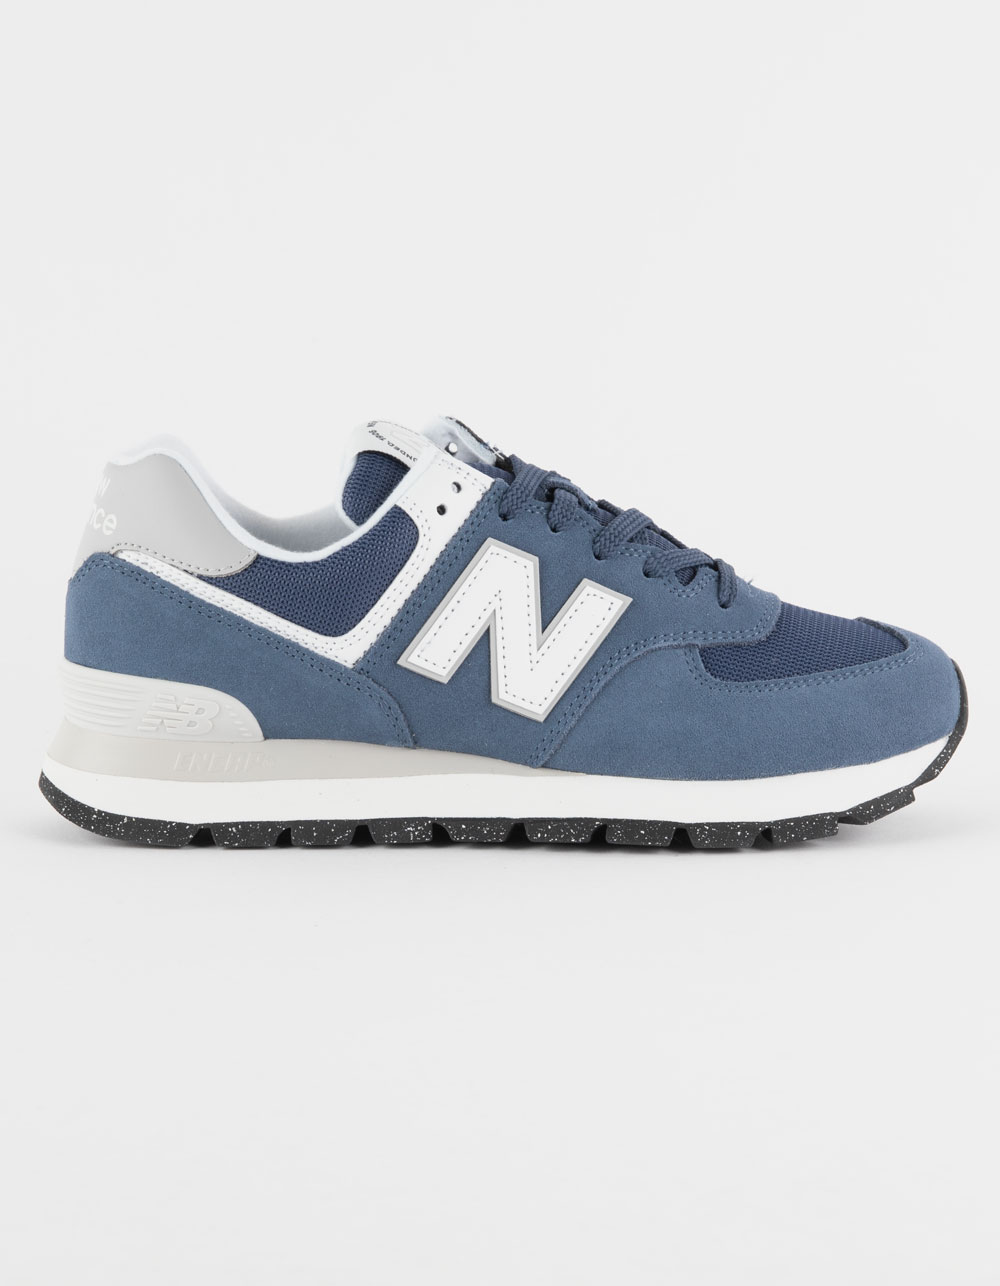 NEW BALANCE 574 Mens Shoes - NAVY/WHITE | Tillys